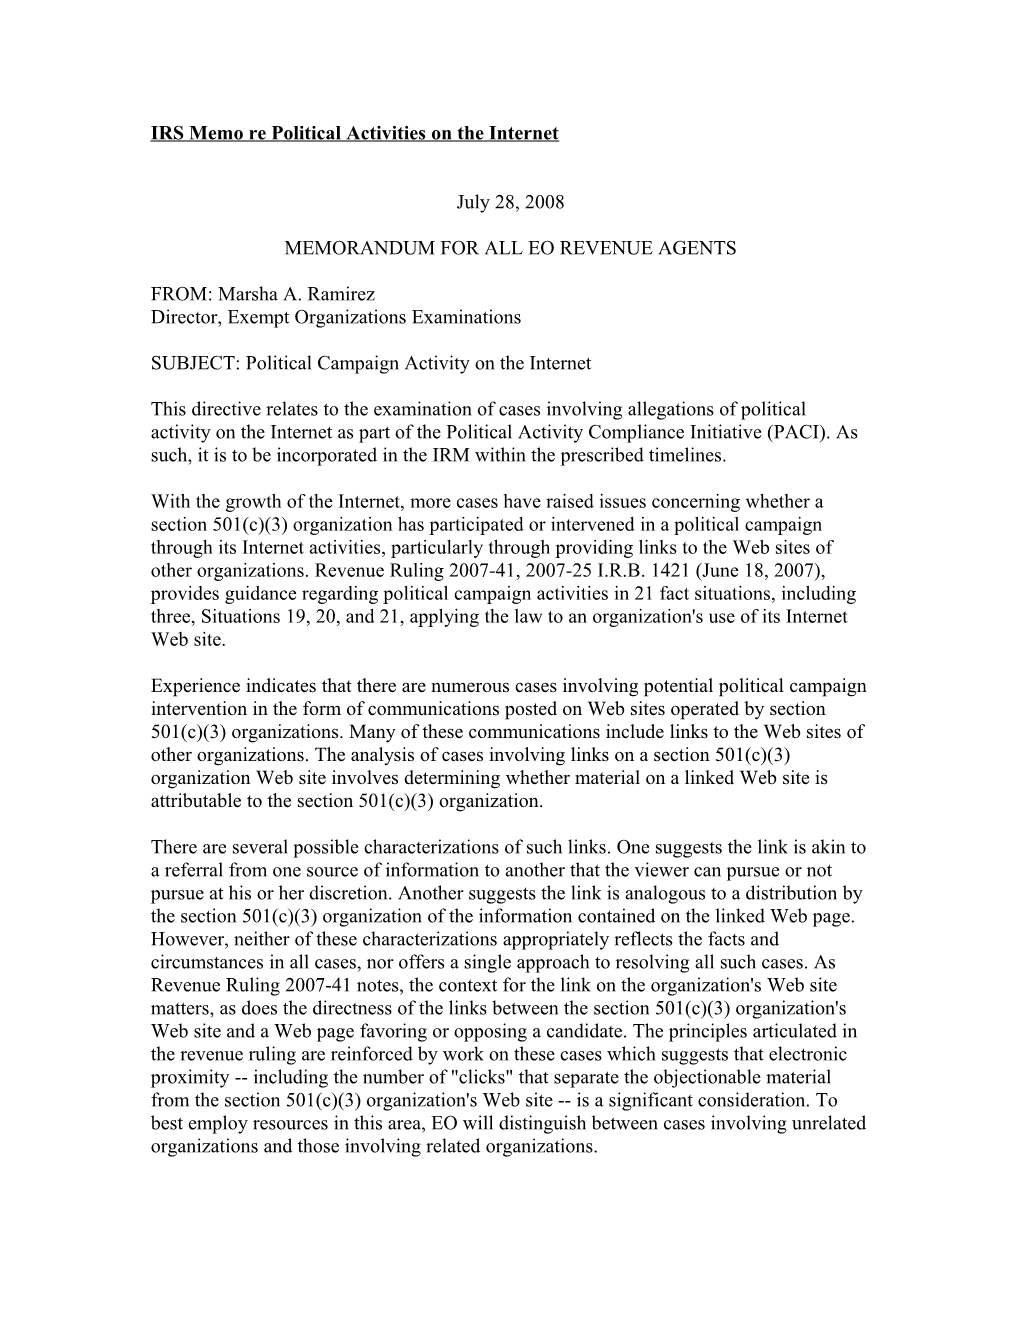 IRS Memo Re Political Activities on the Internet